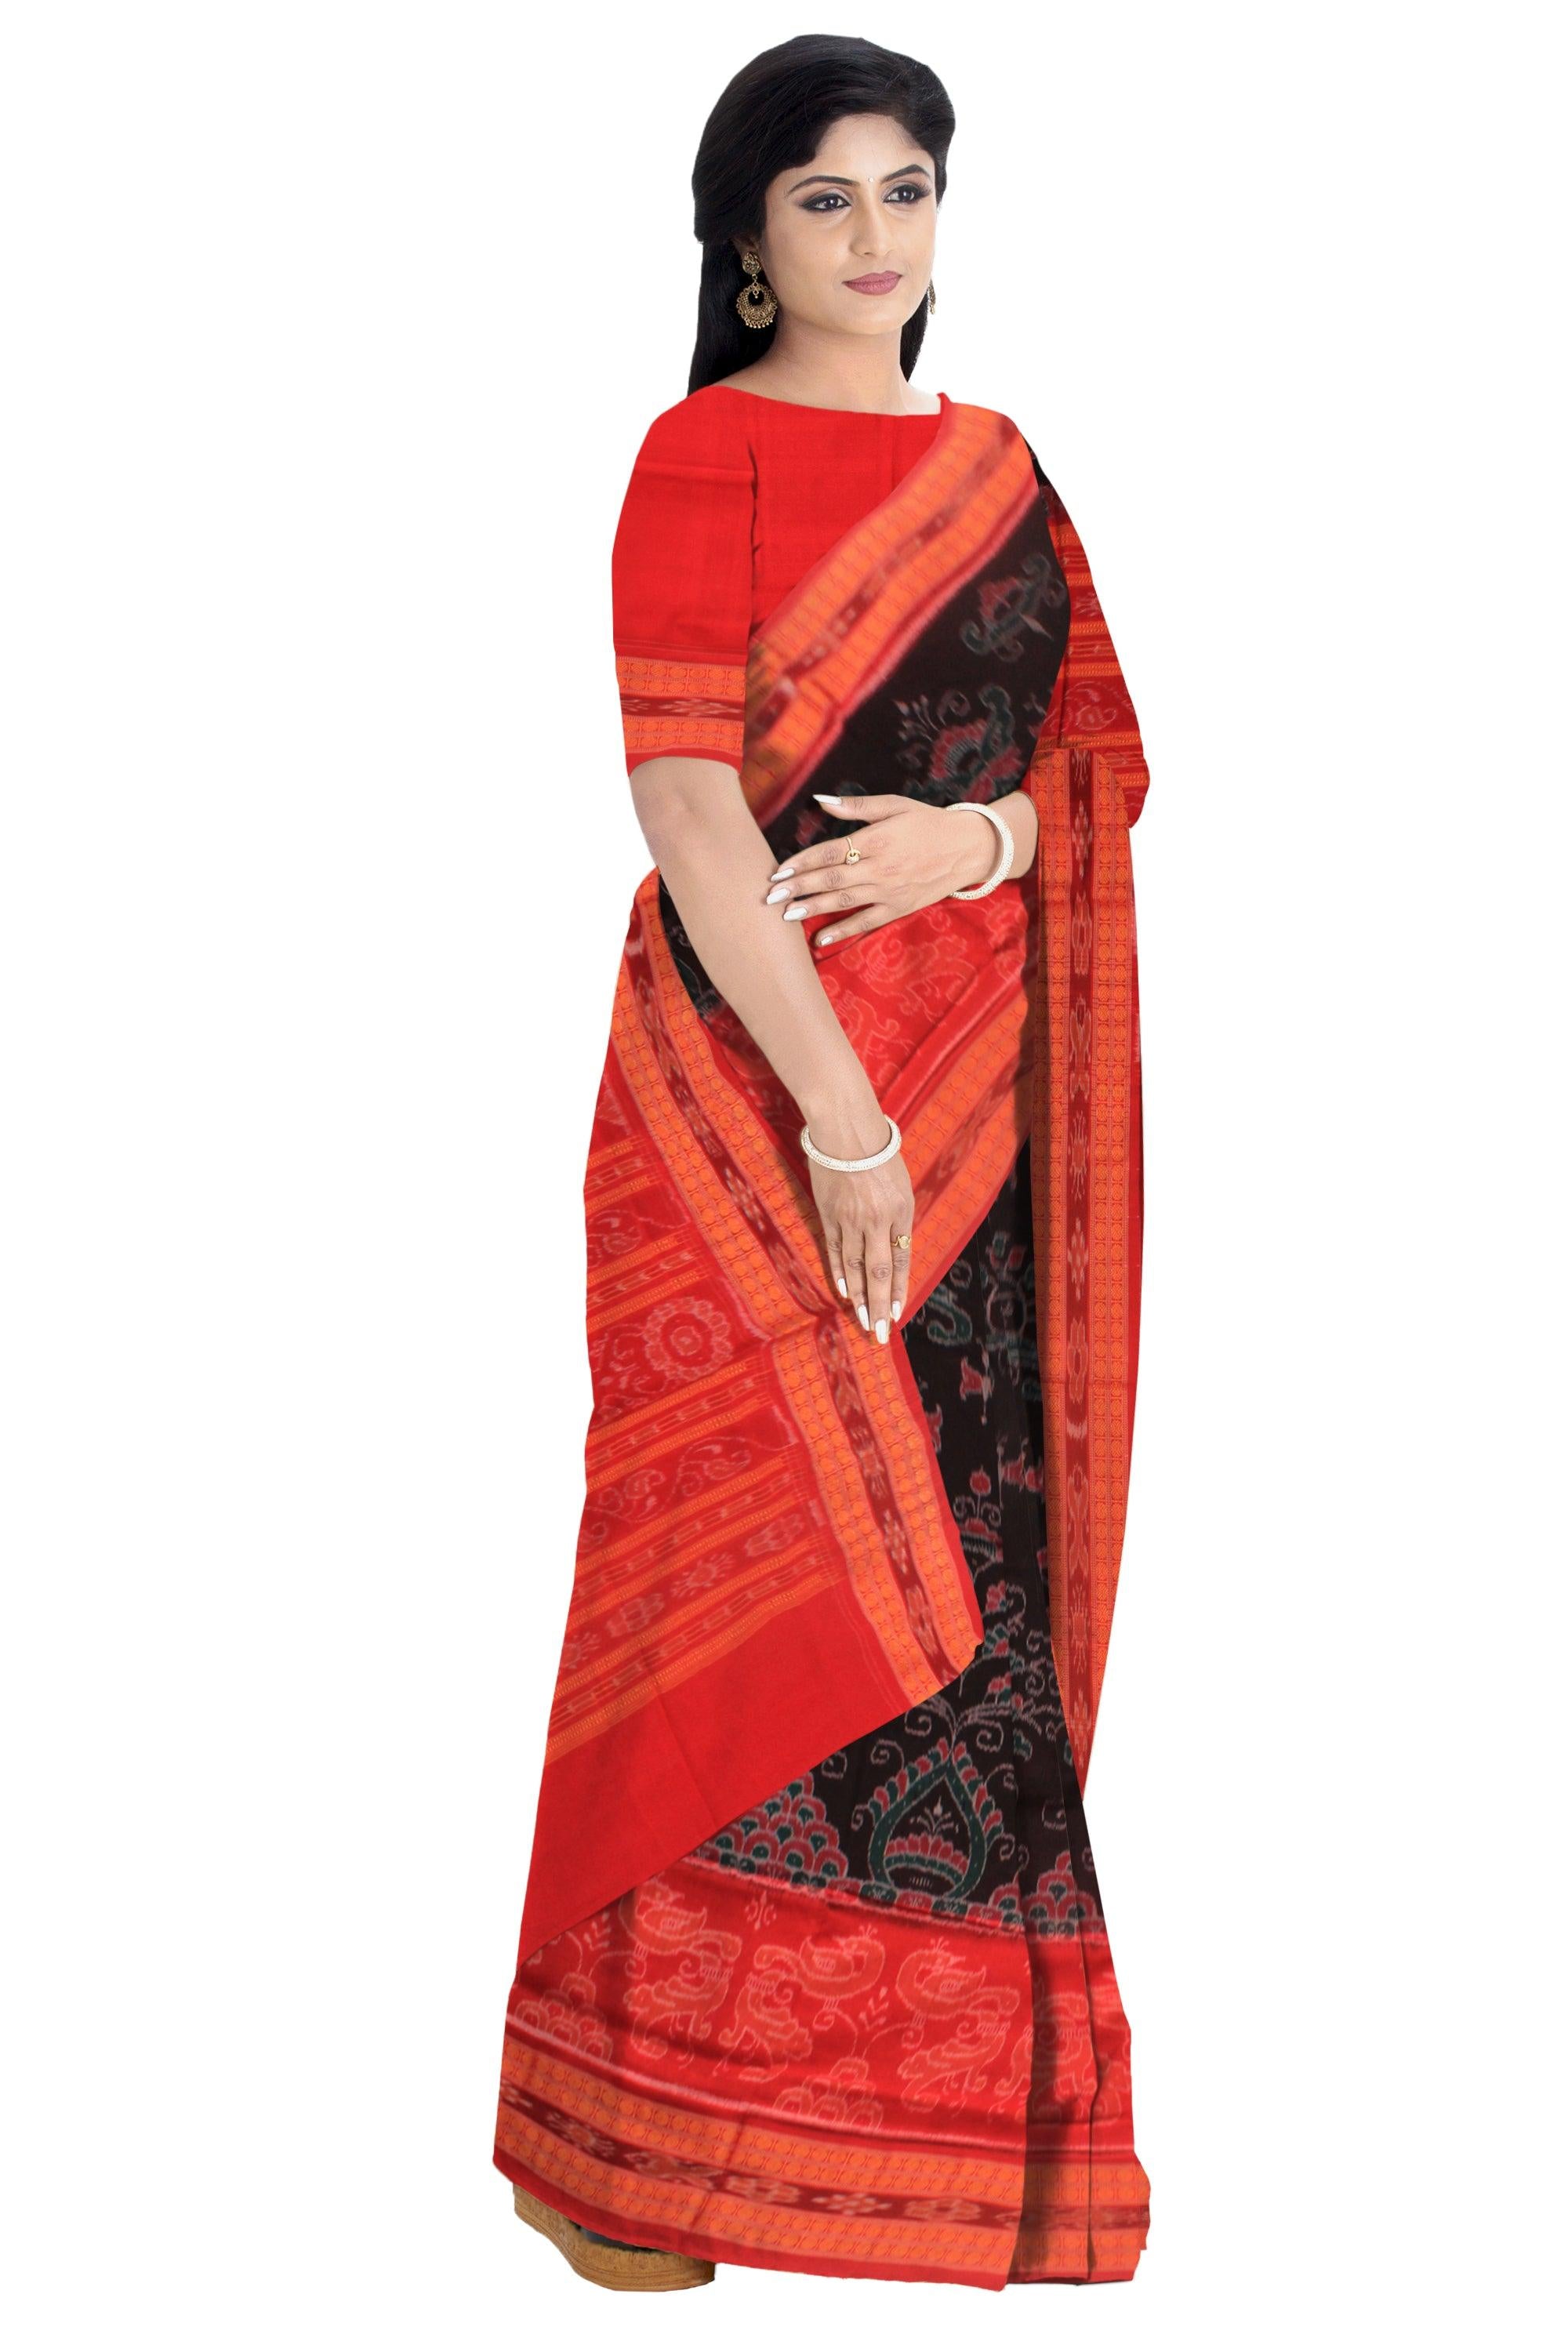 BLACK AND RED COLOR  NEW DSIGN COTTON SAREE , WITH BLOUSE PIECE. - Koshali Arts & Crafts Enterprise